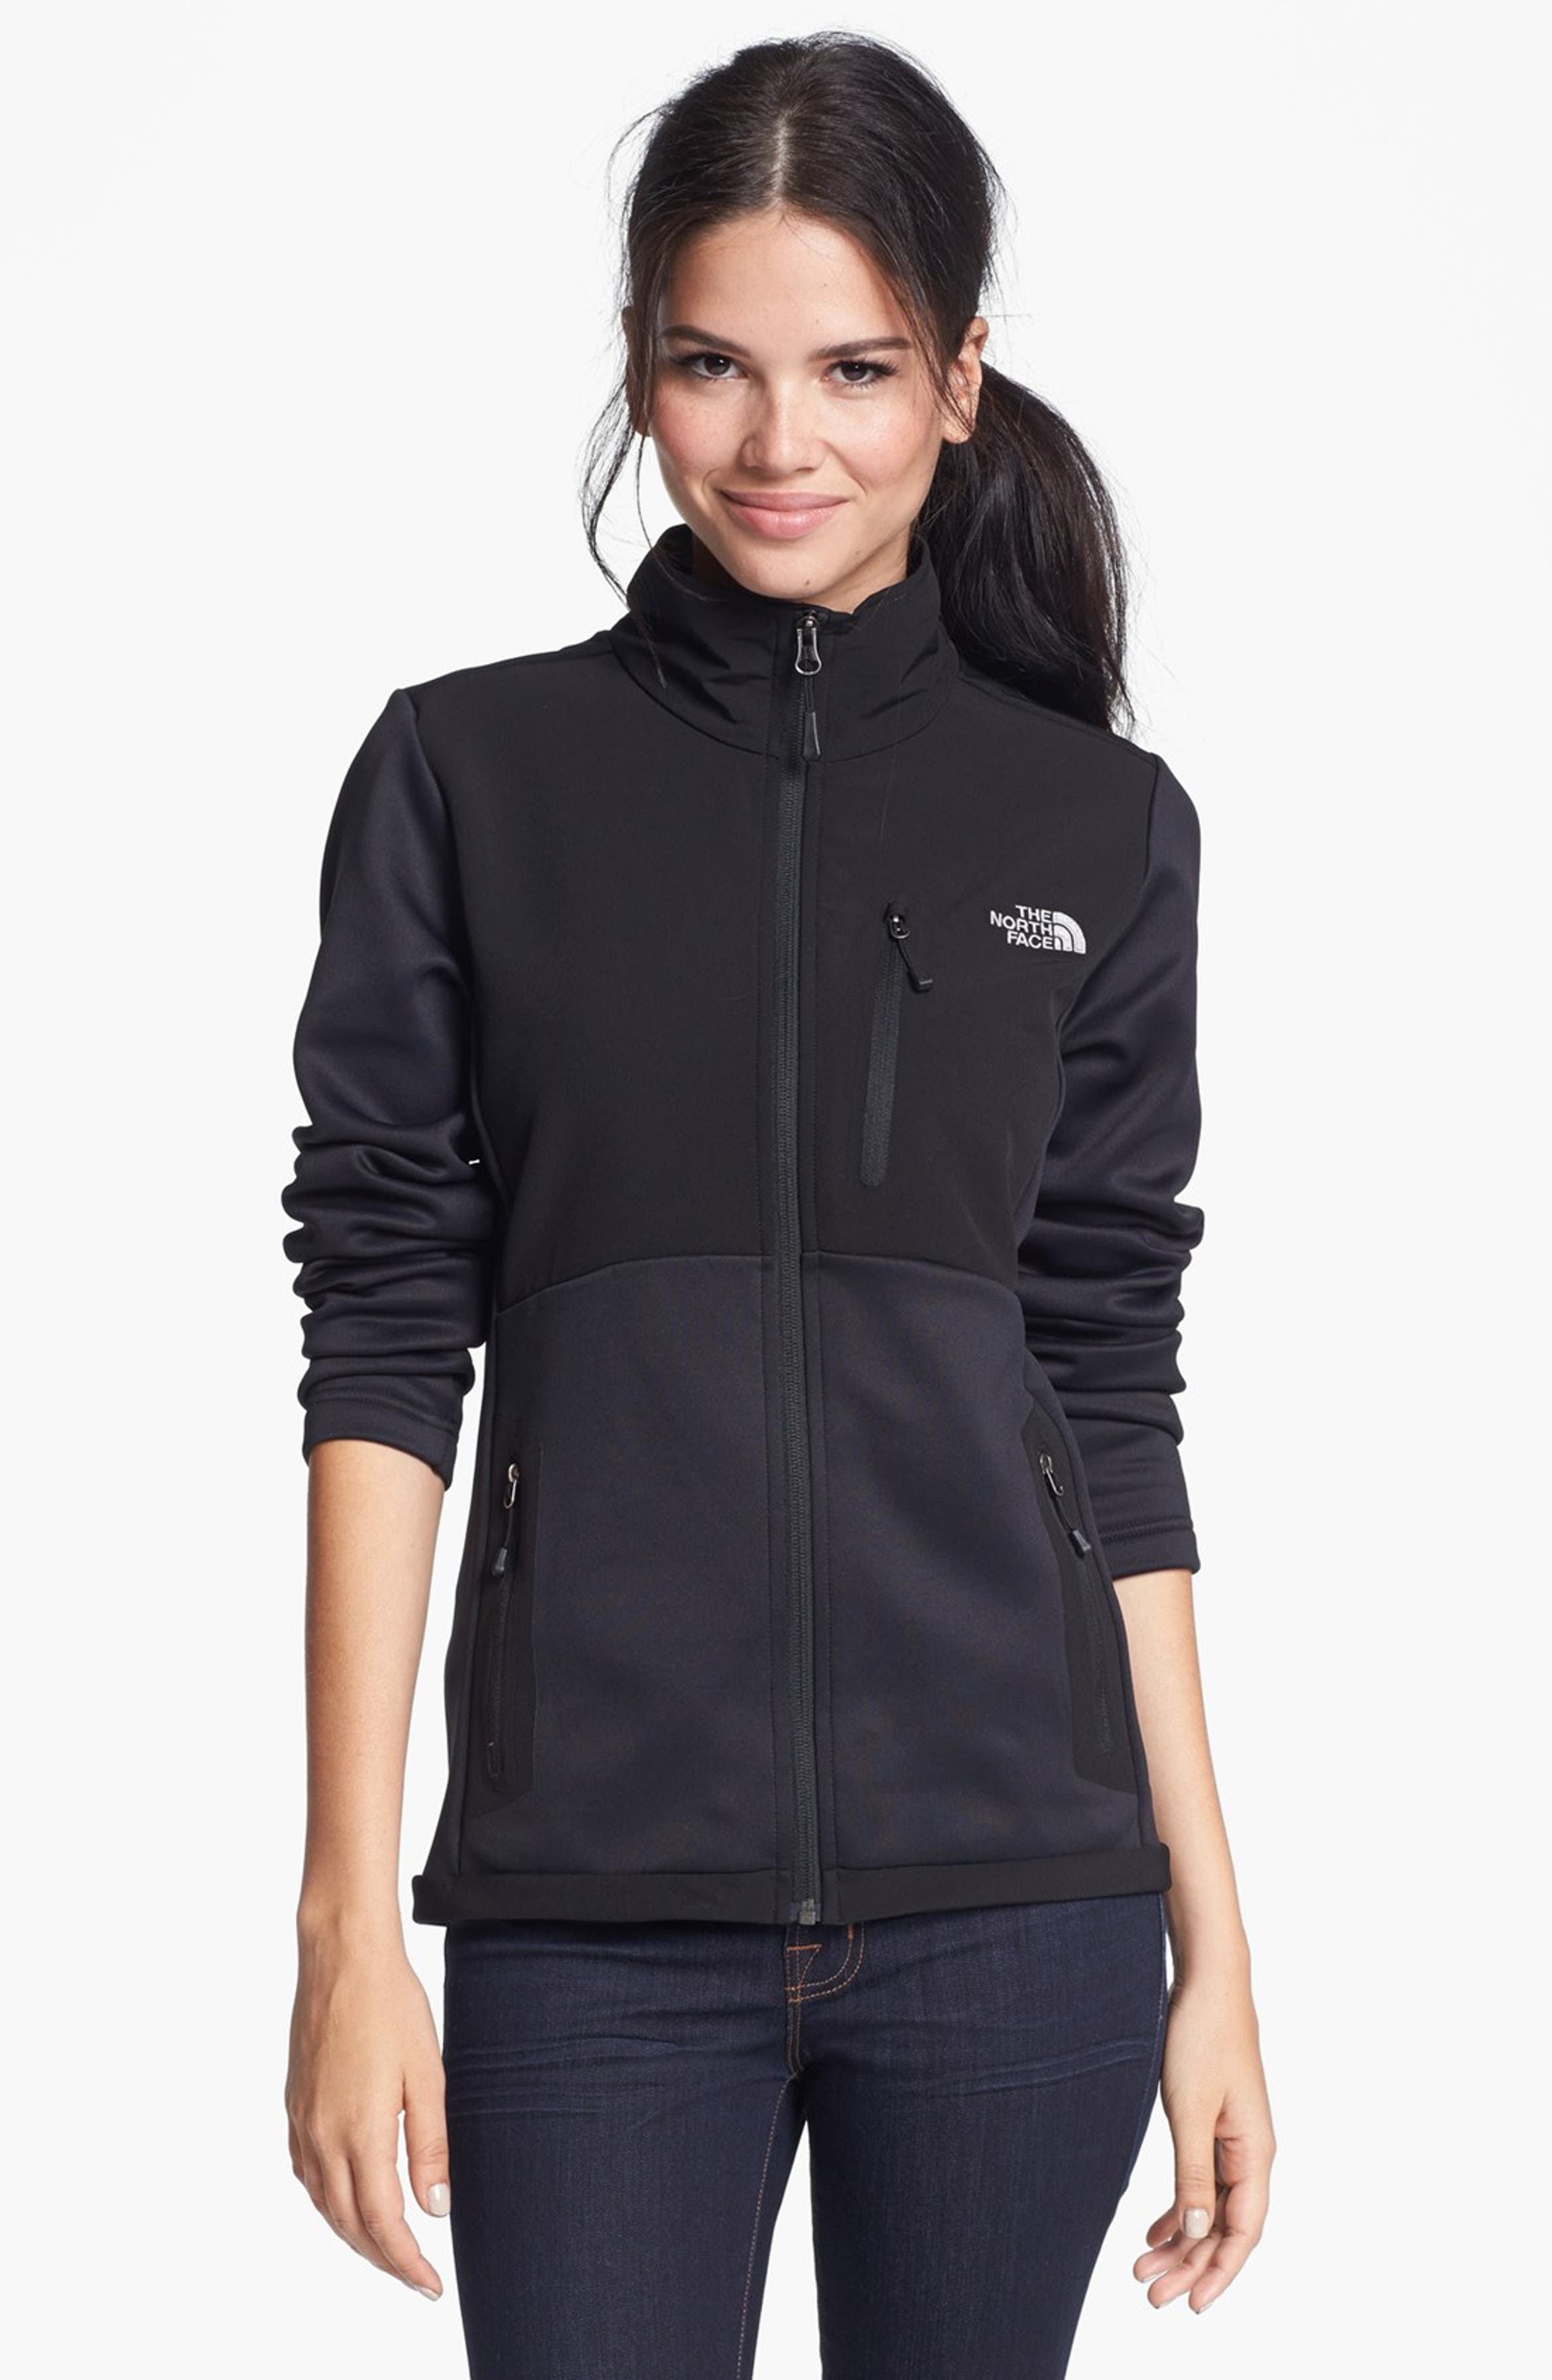 The North Face 'RDT Momentum' Jacket | Nordstrom